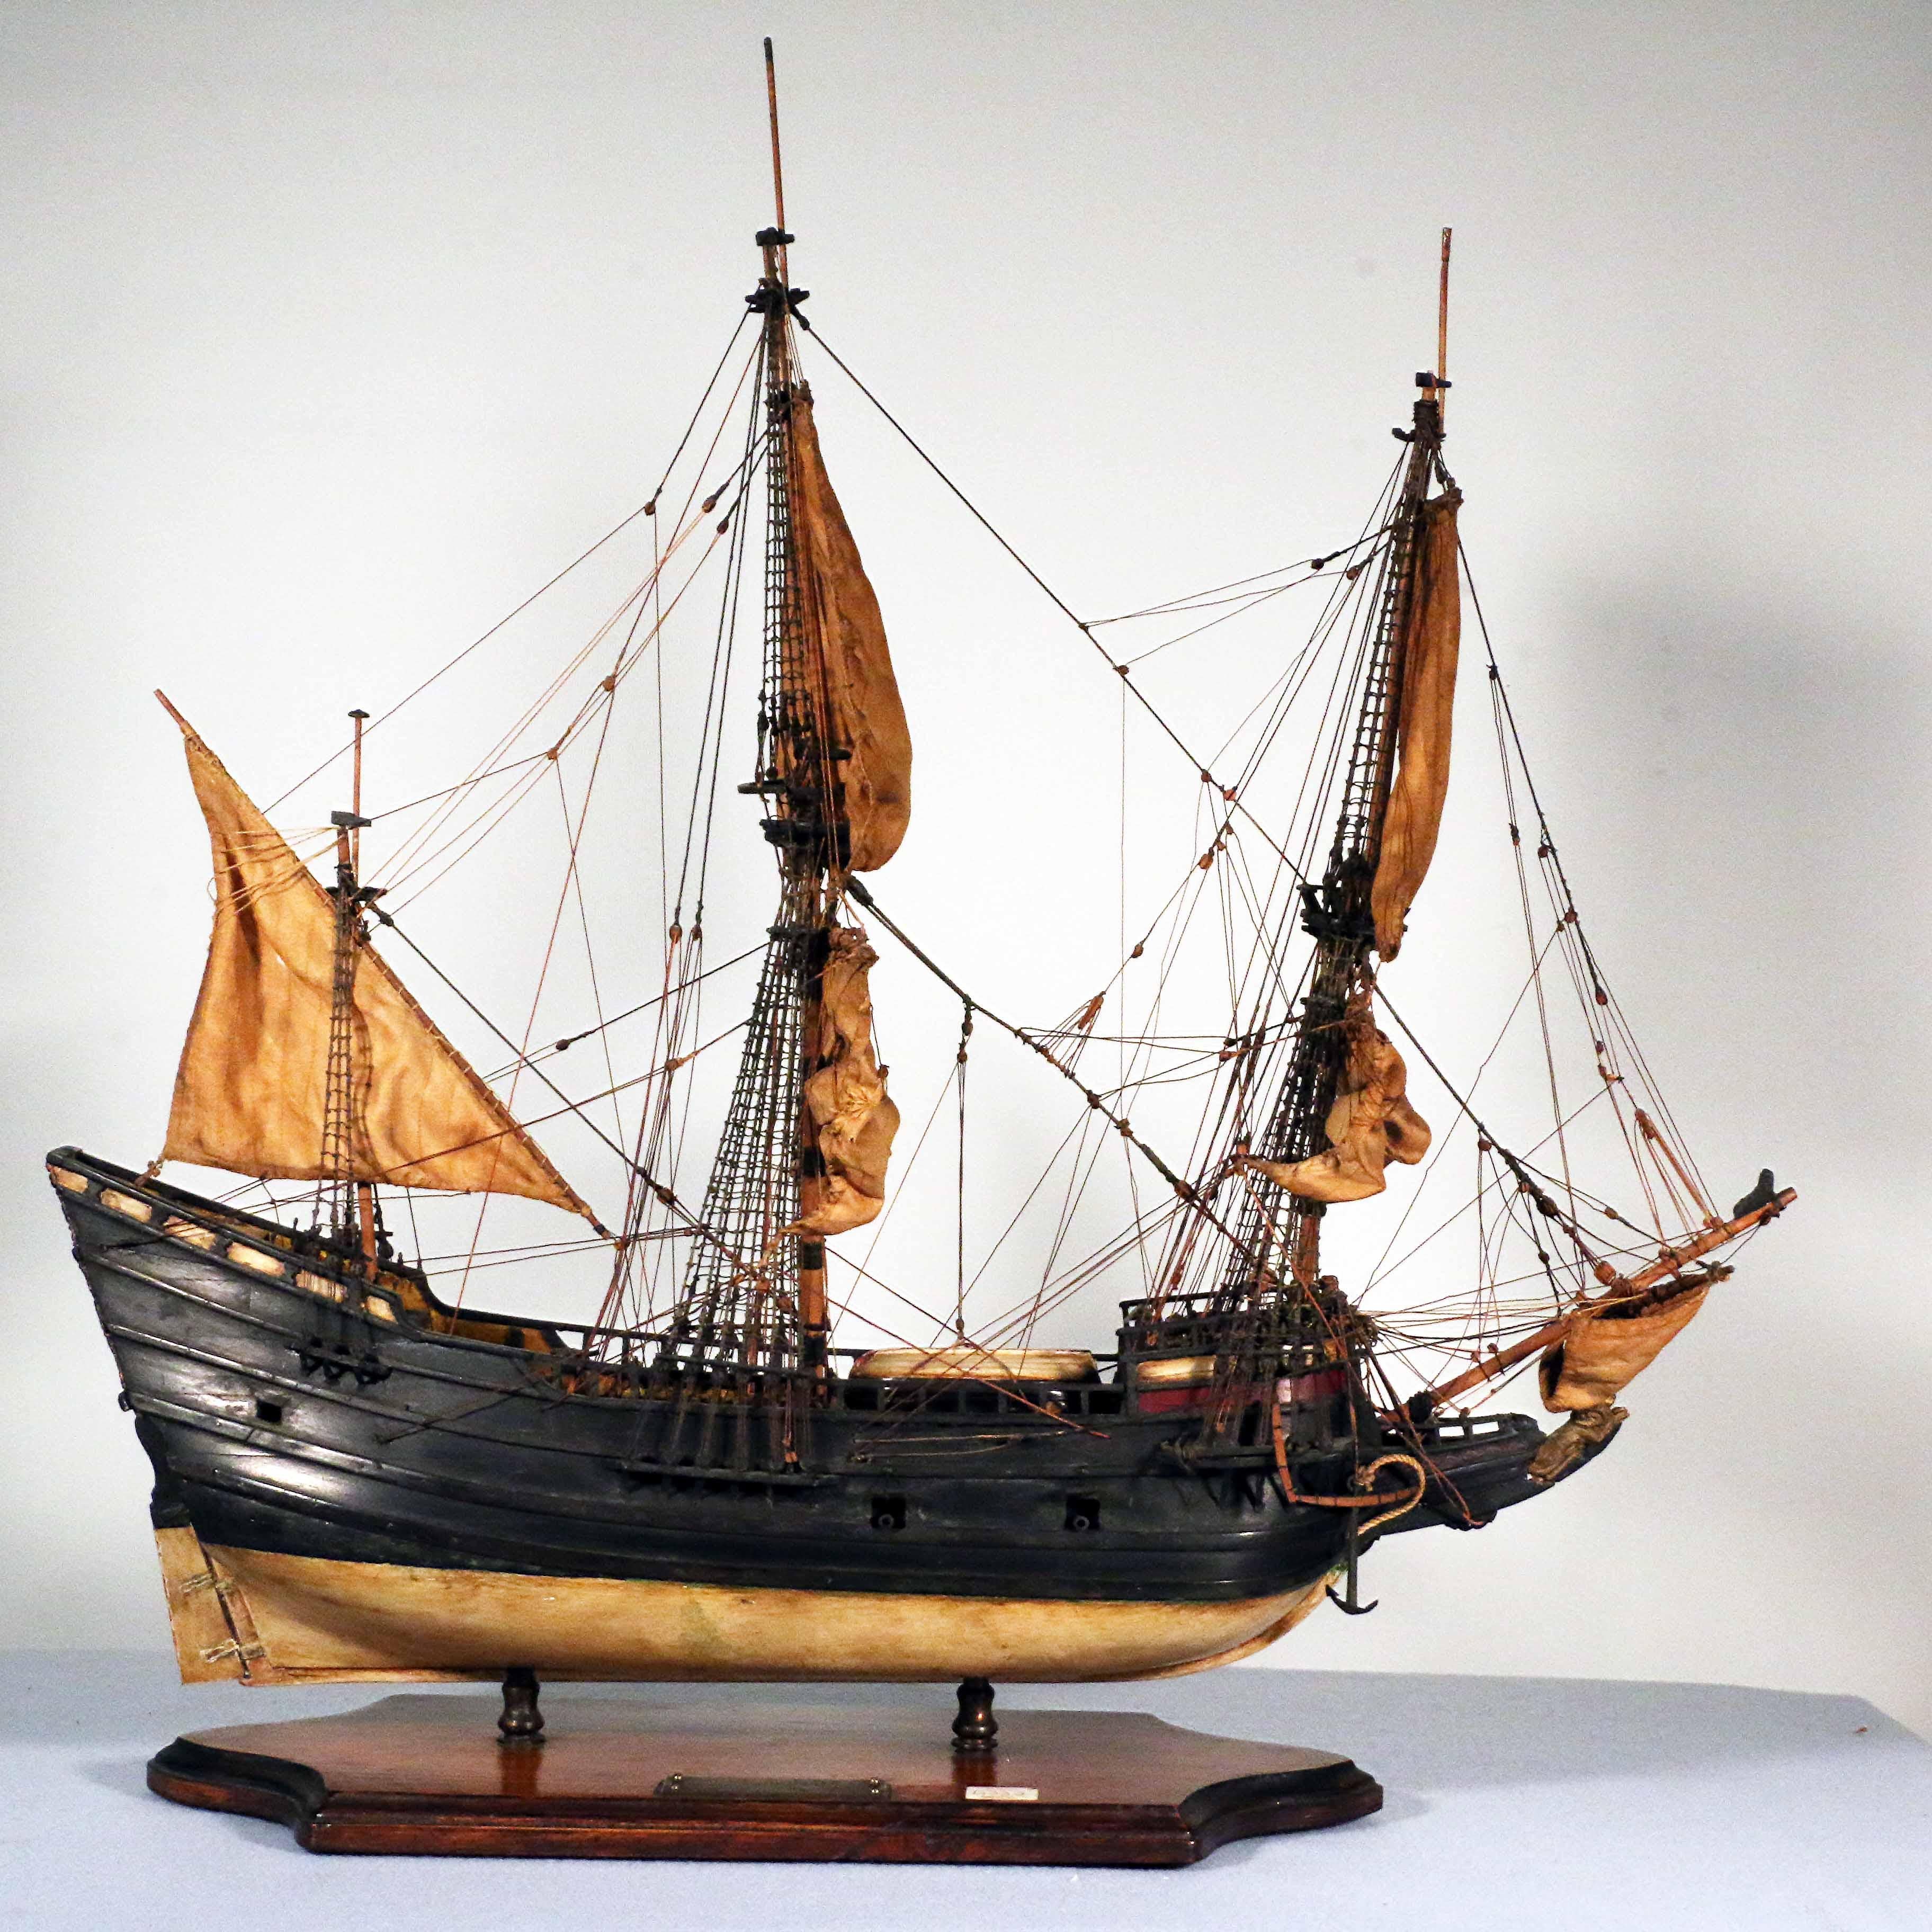 This model of the Halve Maen (Half Moon), was crafted from scratch in the first quarter of the 20th century by L Lavallee. The attention to the exact details of the well-documented original design of the Halve Maen is outstanding. Being almost 100